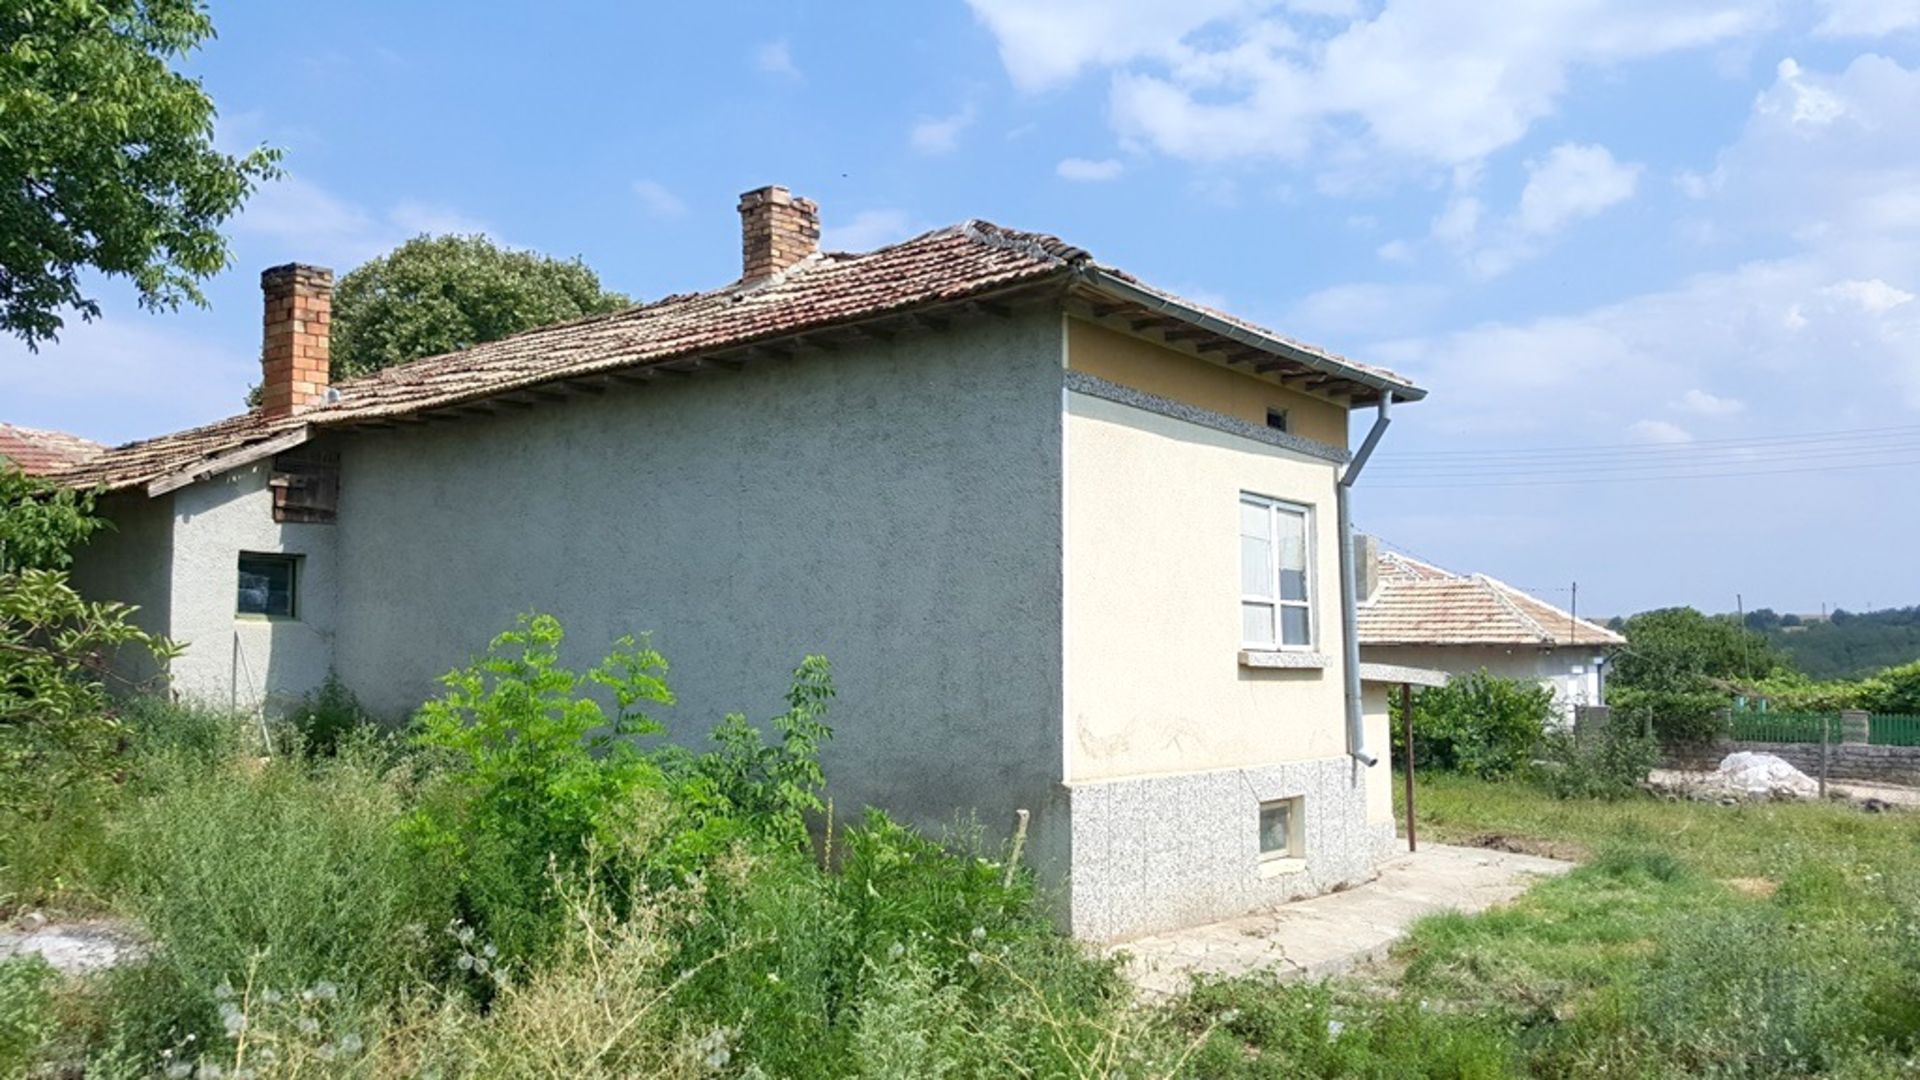 SUNFLOWER COTTAGE IN KRASEN, BULGARIA  - 30 miles from Beach! - Image 5 of 64